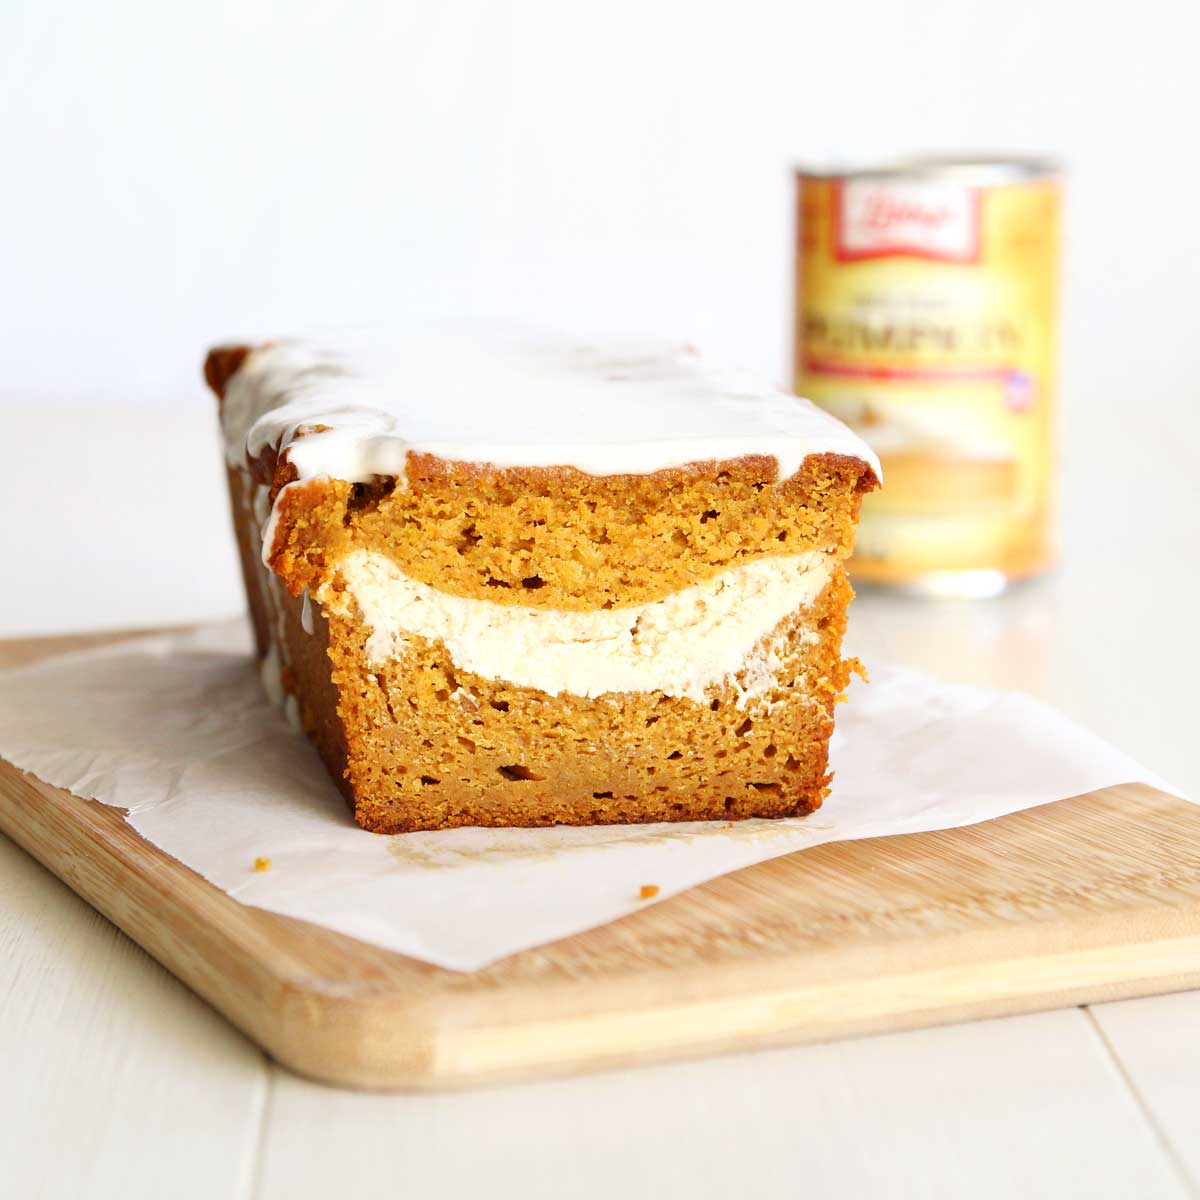 Incredibly Moist Honey Pumpkin Bread with Cream Cheese Swirl Filling - Brown Sugar Whipped Cream